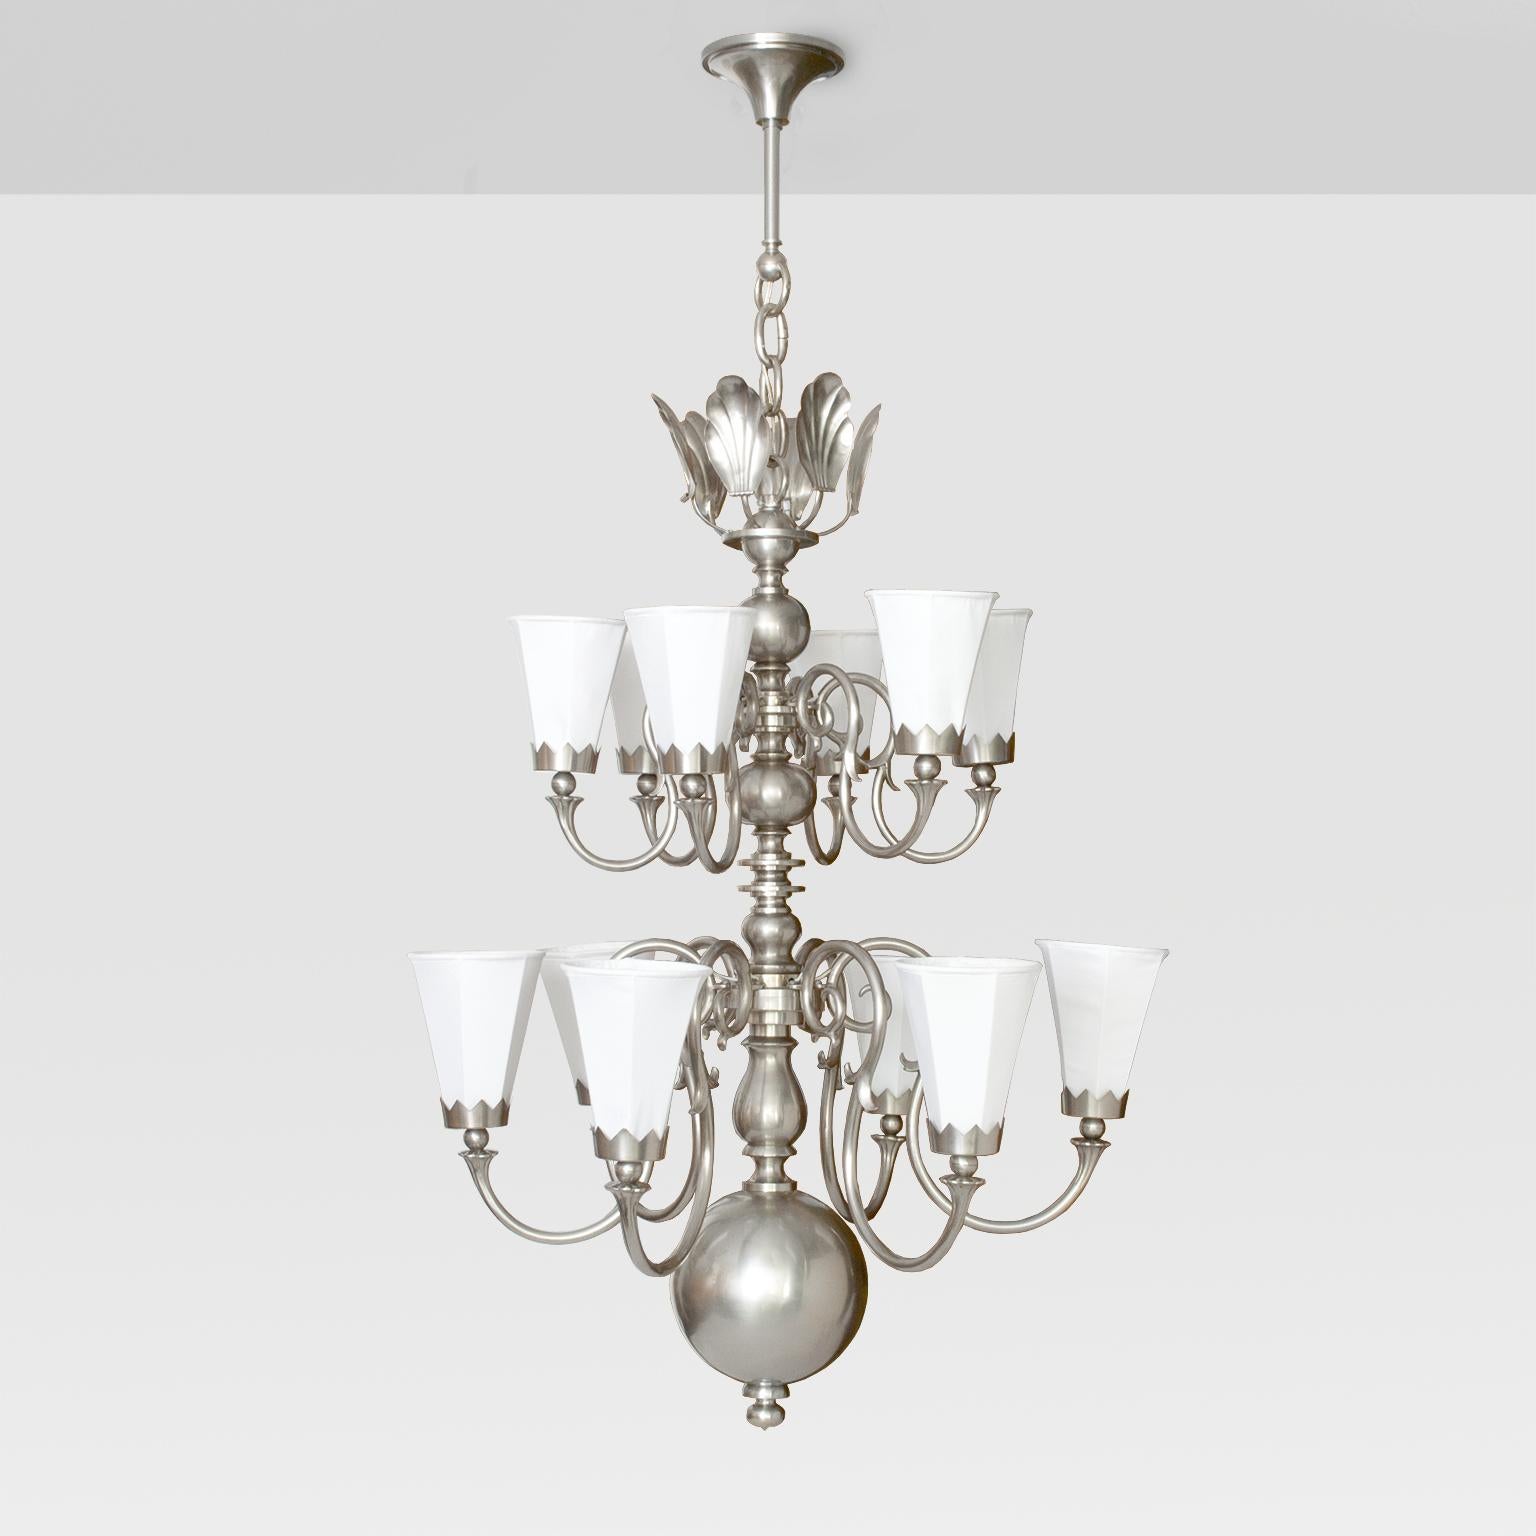 Large 1920's Scandinavian Modern 12-arm chandelier, brass with nickel plate finish. Each arm has a fabric covered 6-sided shade held in place with a crown shaped bobeche. The third-tier is a cluster of stylized shells which reflect light when the